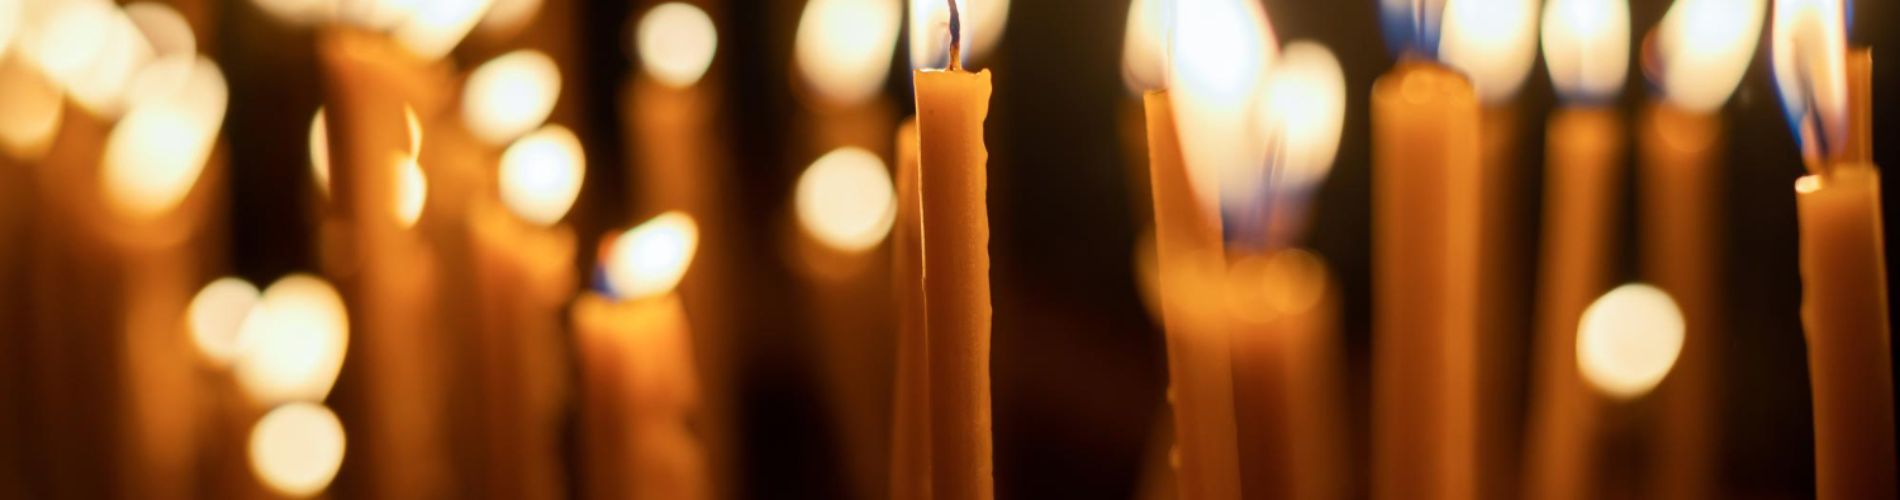 candele accese in chiesa